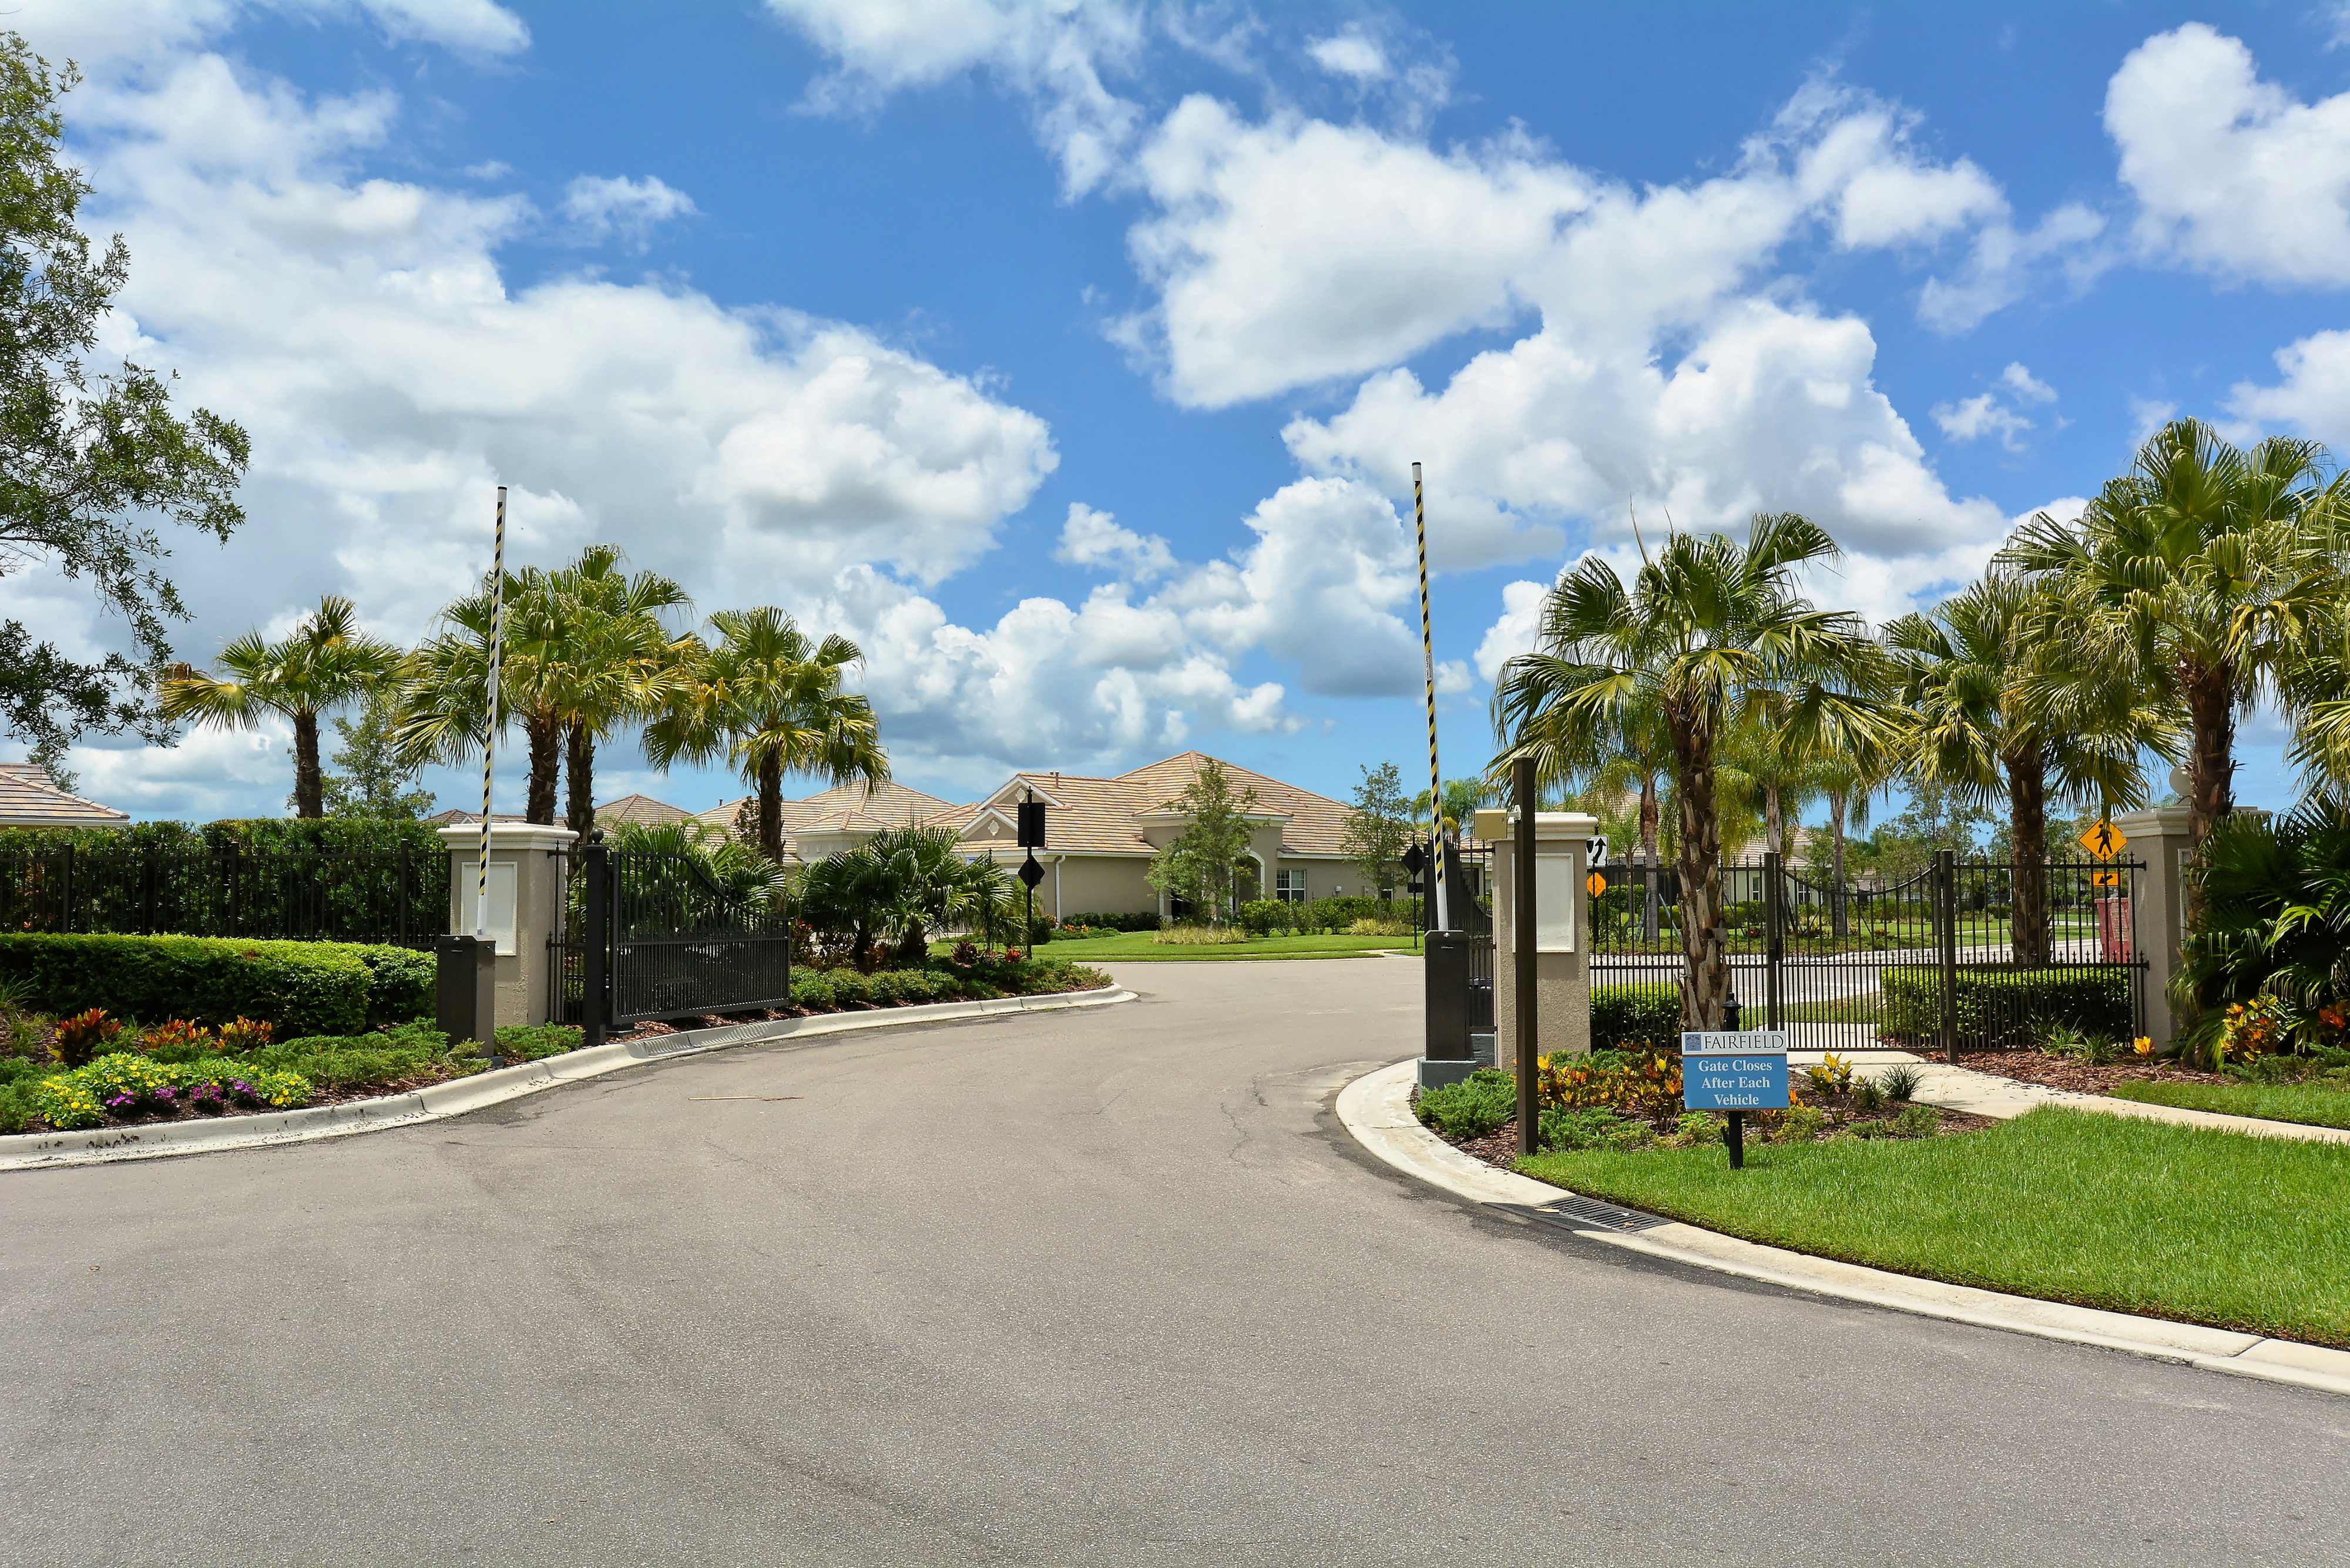 Fairfield Villas in Bradenton : Homes for Sale in a Gated Community